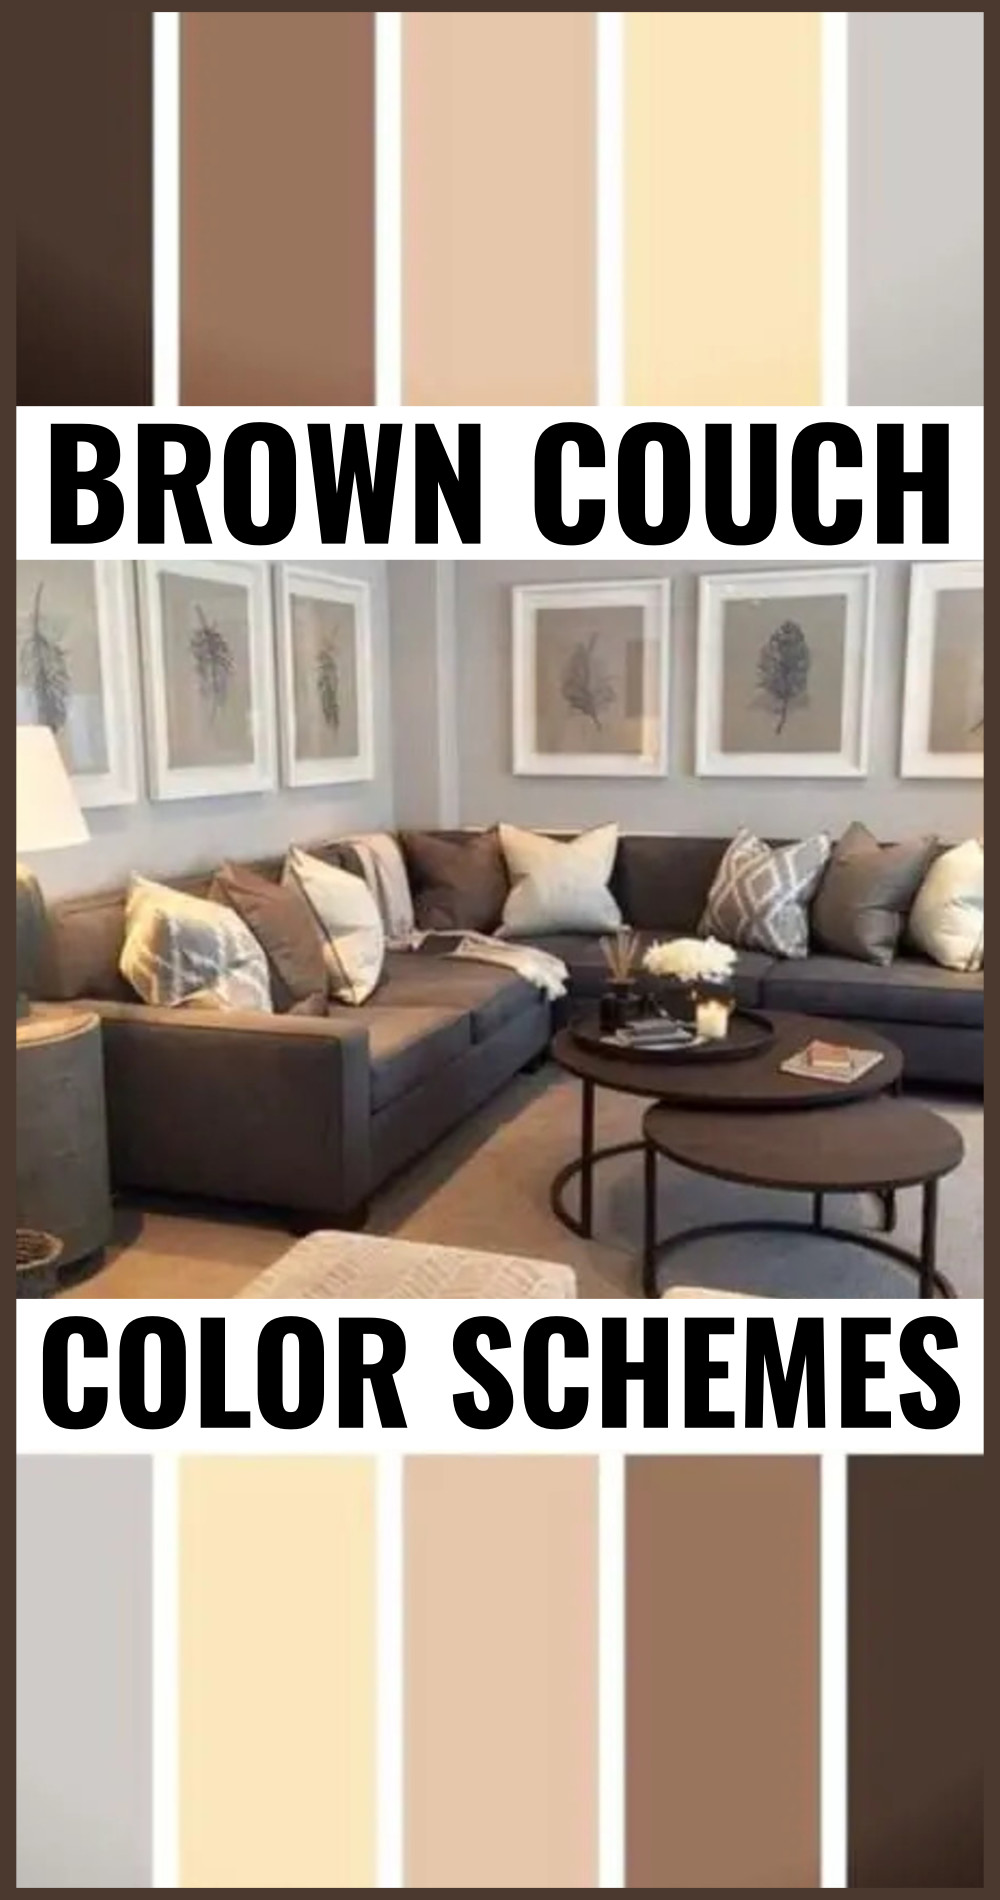 brown couch color schemes></p>
<p><strong>Personal Style:</strong> When it comes to styling your living room, it’s essential to consider your personal style and preferences. Whether you prefer a rustic, modern, or classic look, there are plenty of ways to make a brown sofa the centerpiece of your living room.</p>
<p>So Sheila, we’ve now both agreed that you have an awesome brown couch to work with – so how can you jazz up your living room with some cool color schemes and accent colors? </p>
<p>Decorating a living room around a brown couch can be a lot of fun – so many amazing decorating choices!</p>
<p><img decoding=